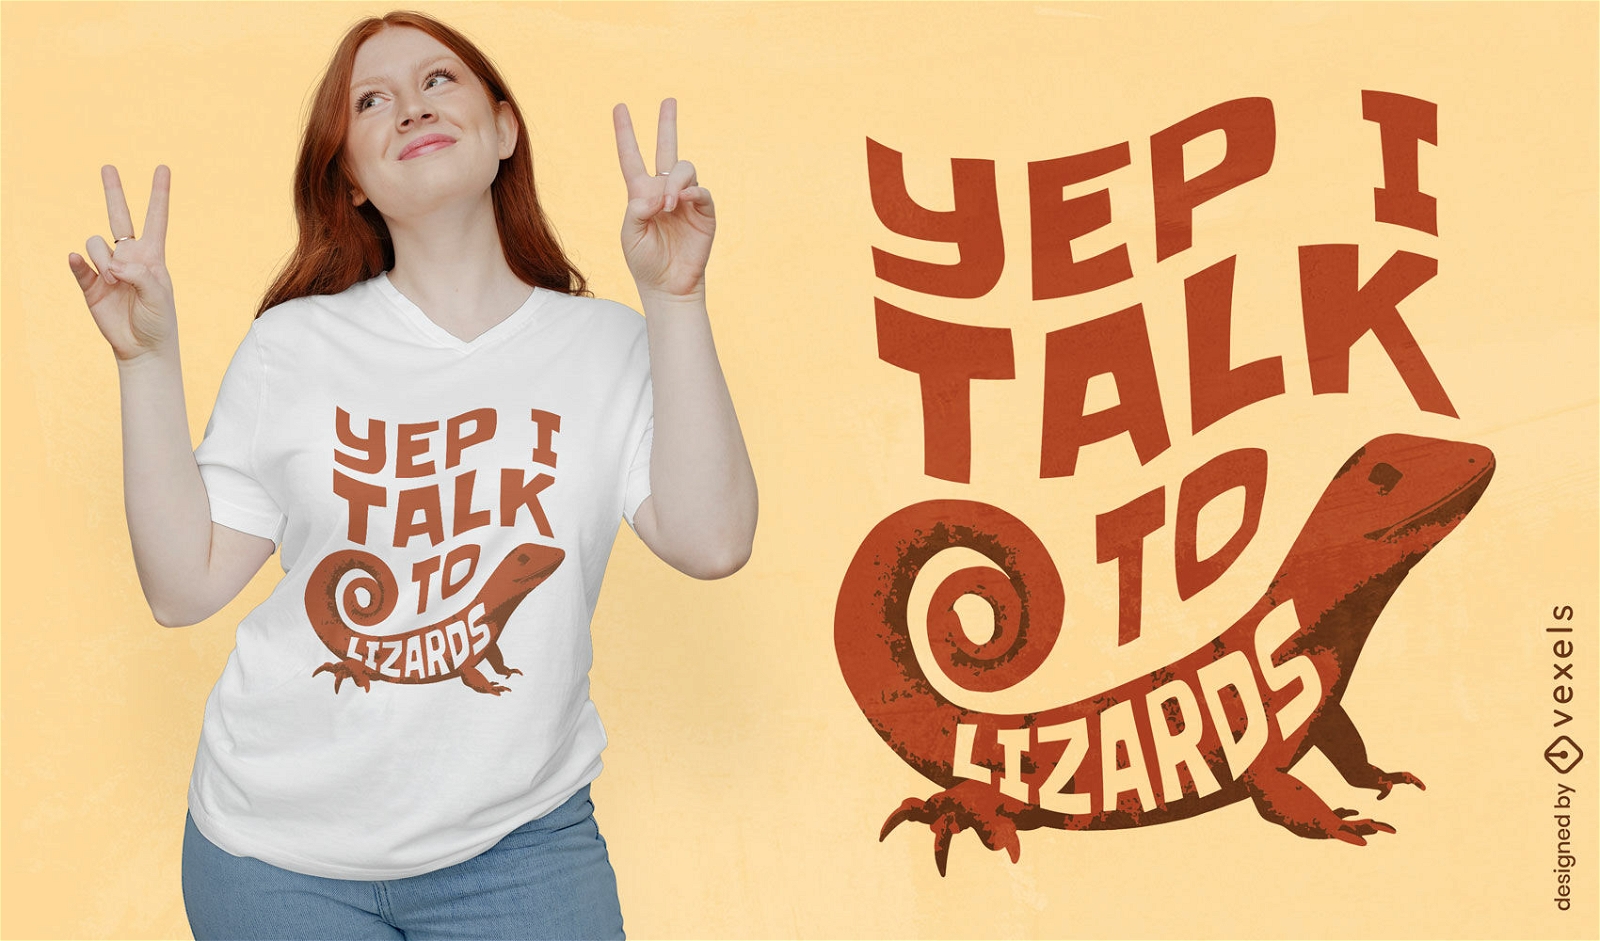 Talk to lizards quote lettering t-shirt design